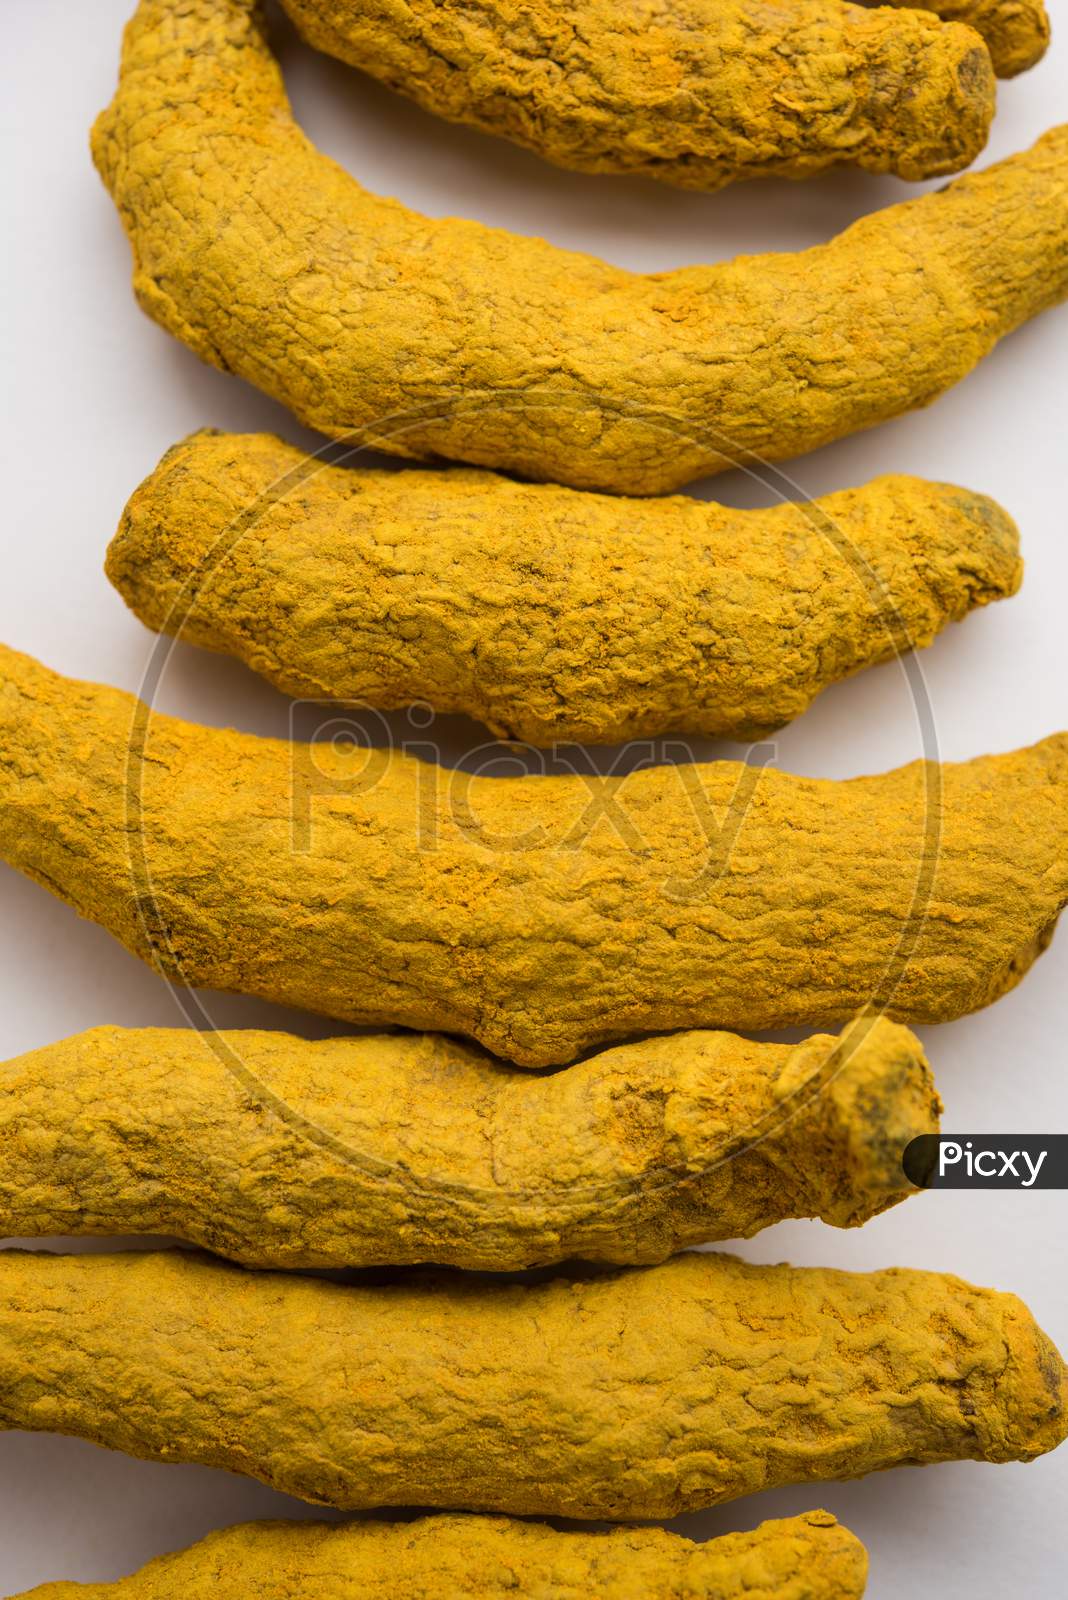 Haldi Or Dried Turmeric Roots As A Whole On White Background